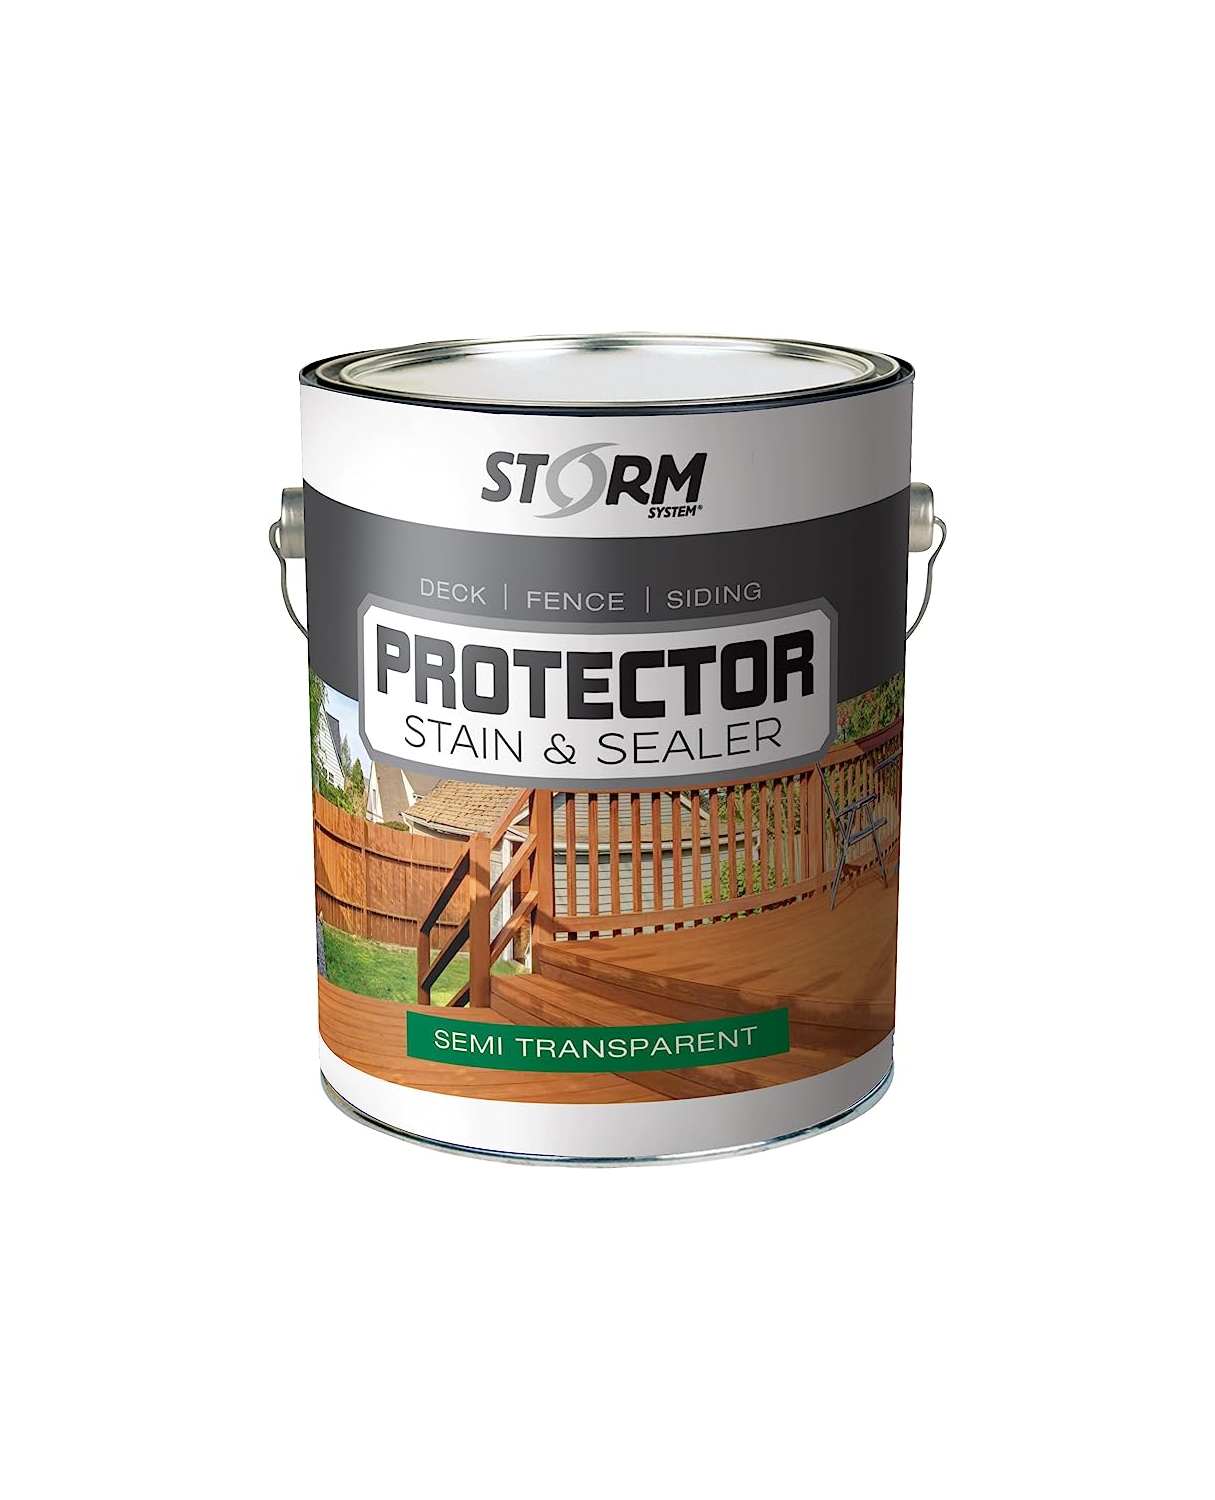 A gallon of storm protector stain and sealer